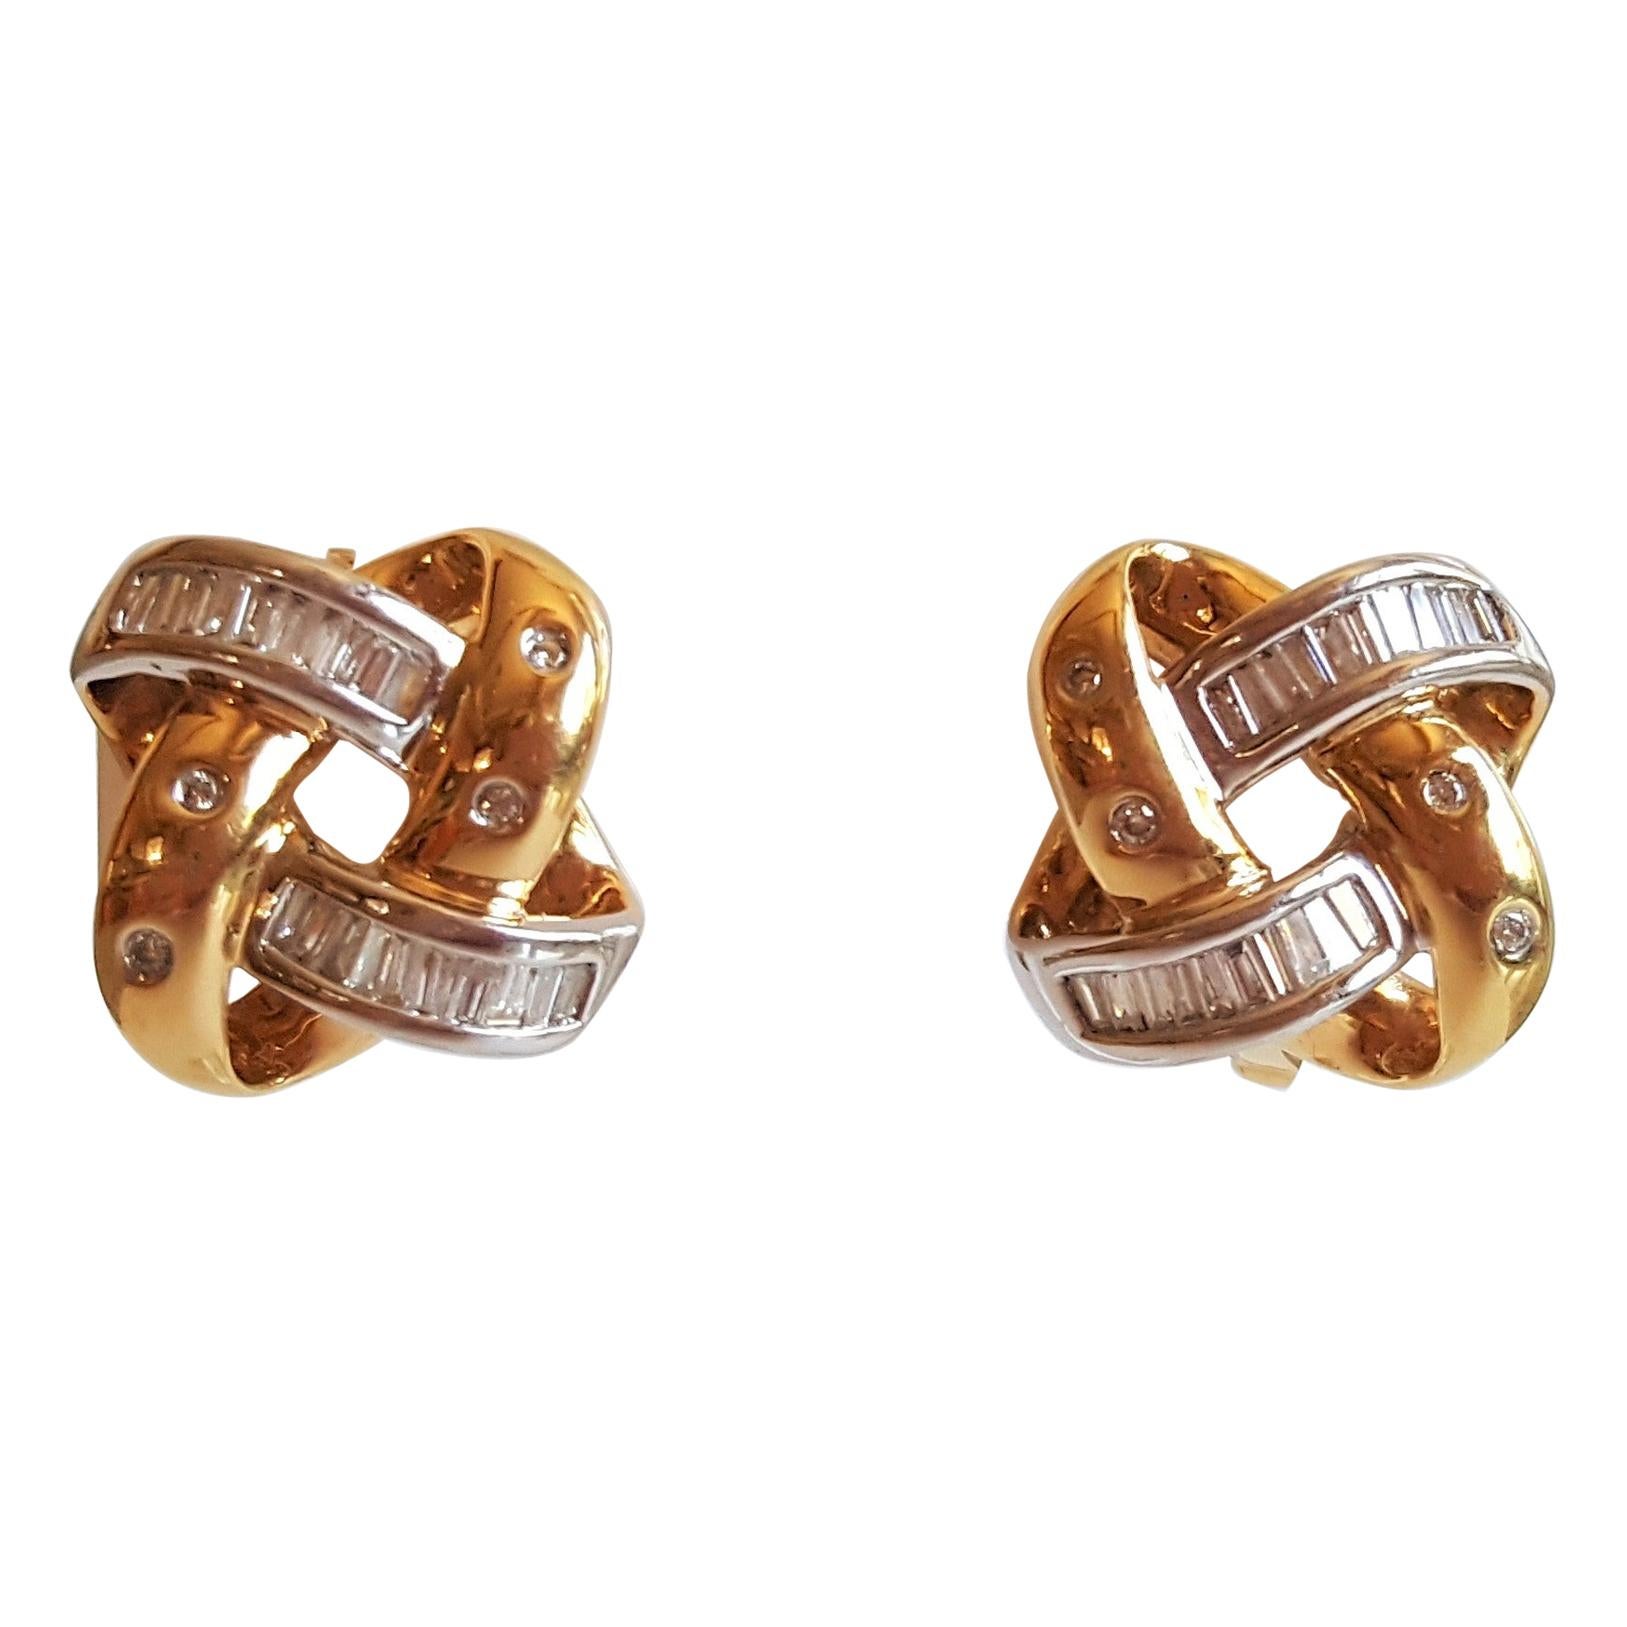 18kt Two-Tone Diamond Knot Earrings, Approx. 2.00Cttw Diamonds, 13.5 grams For Sale